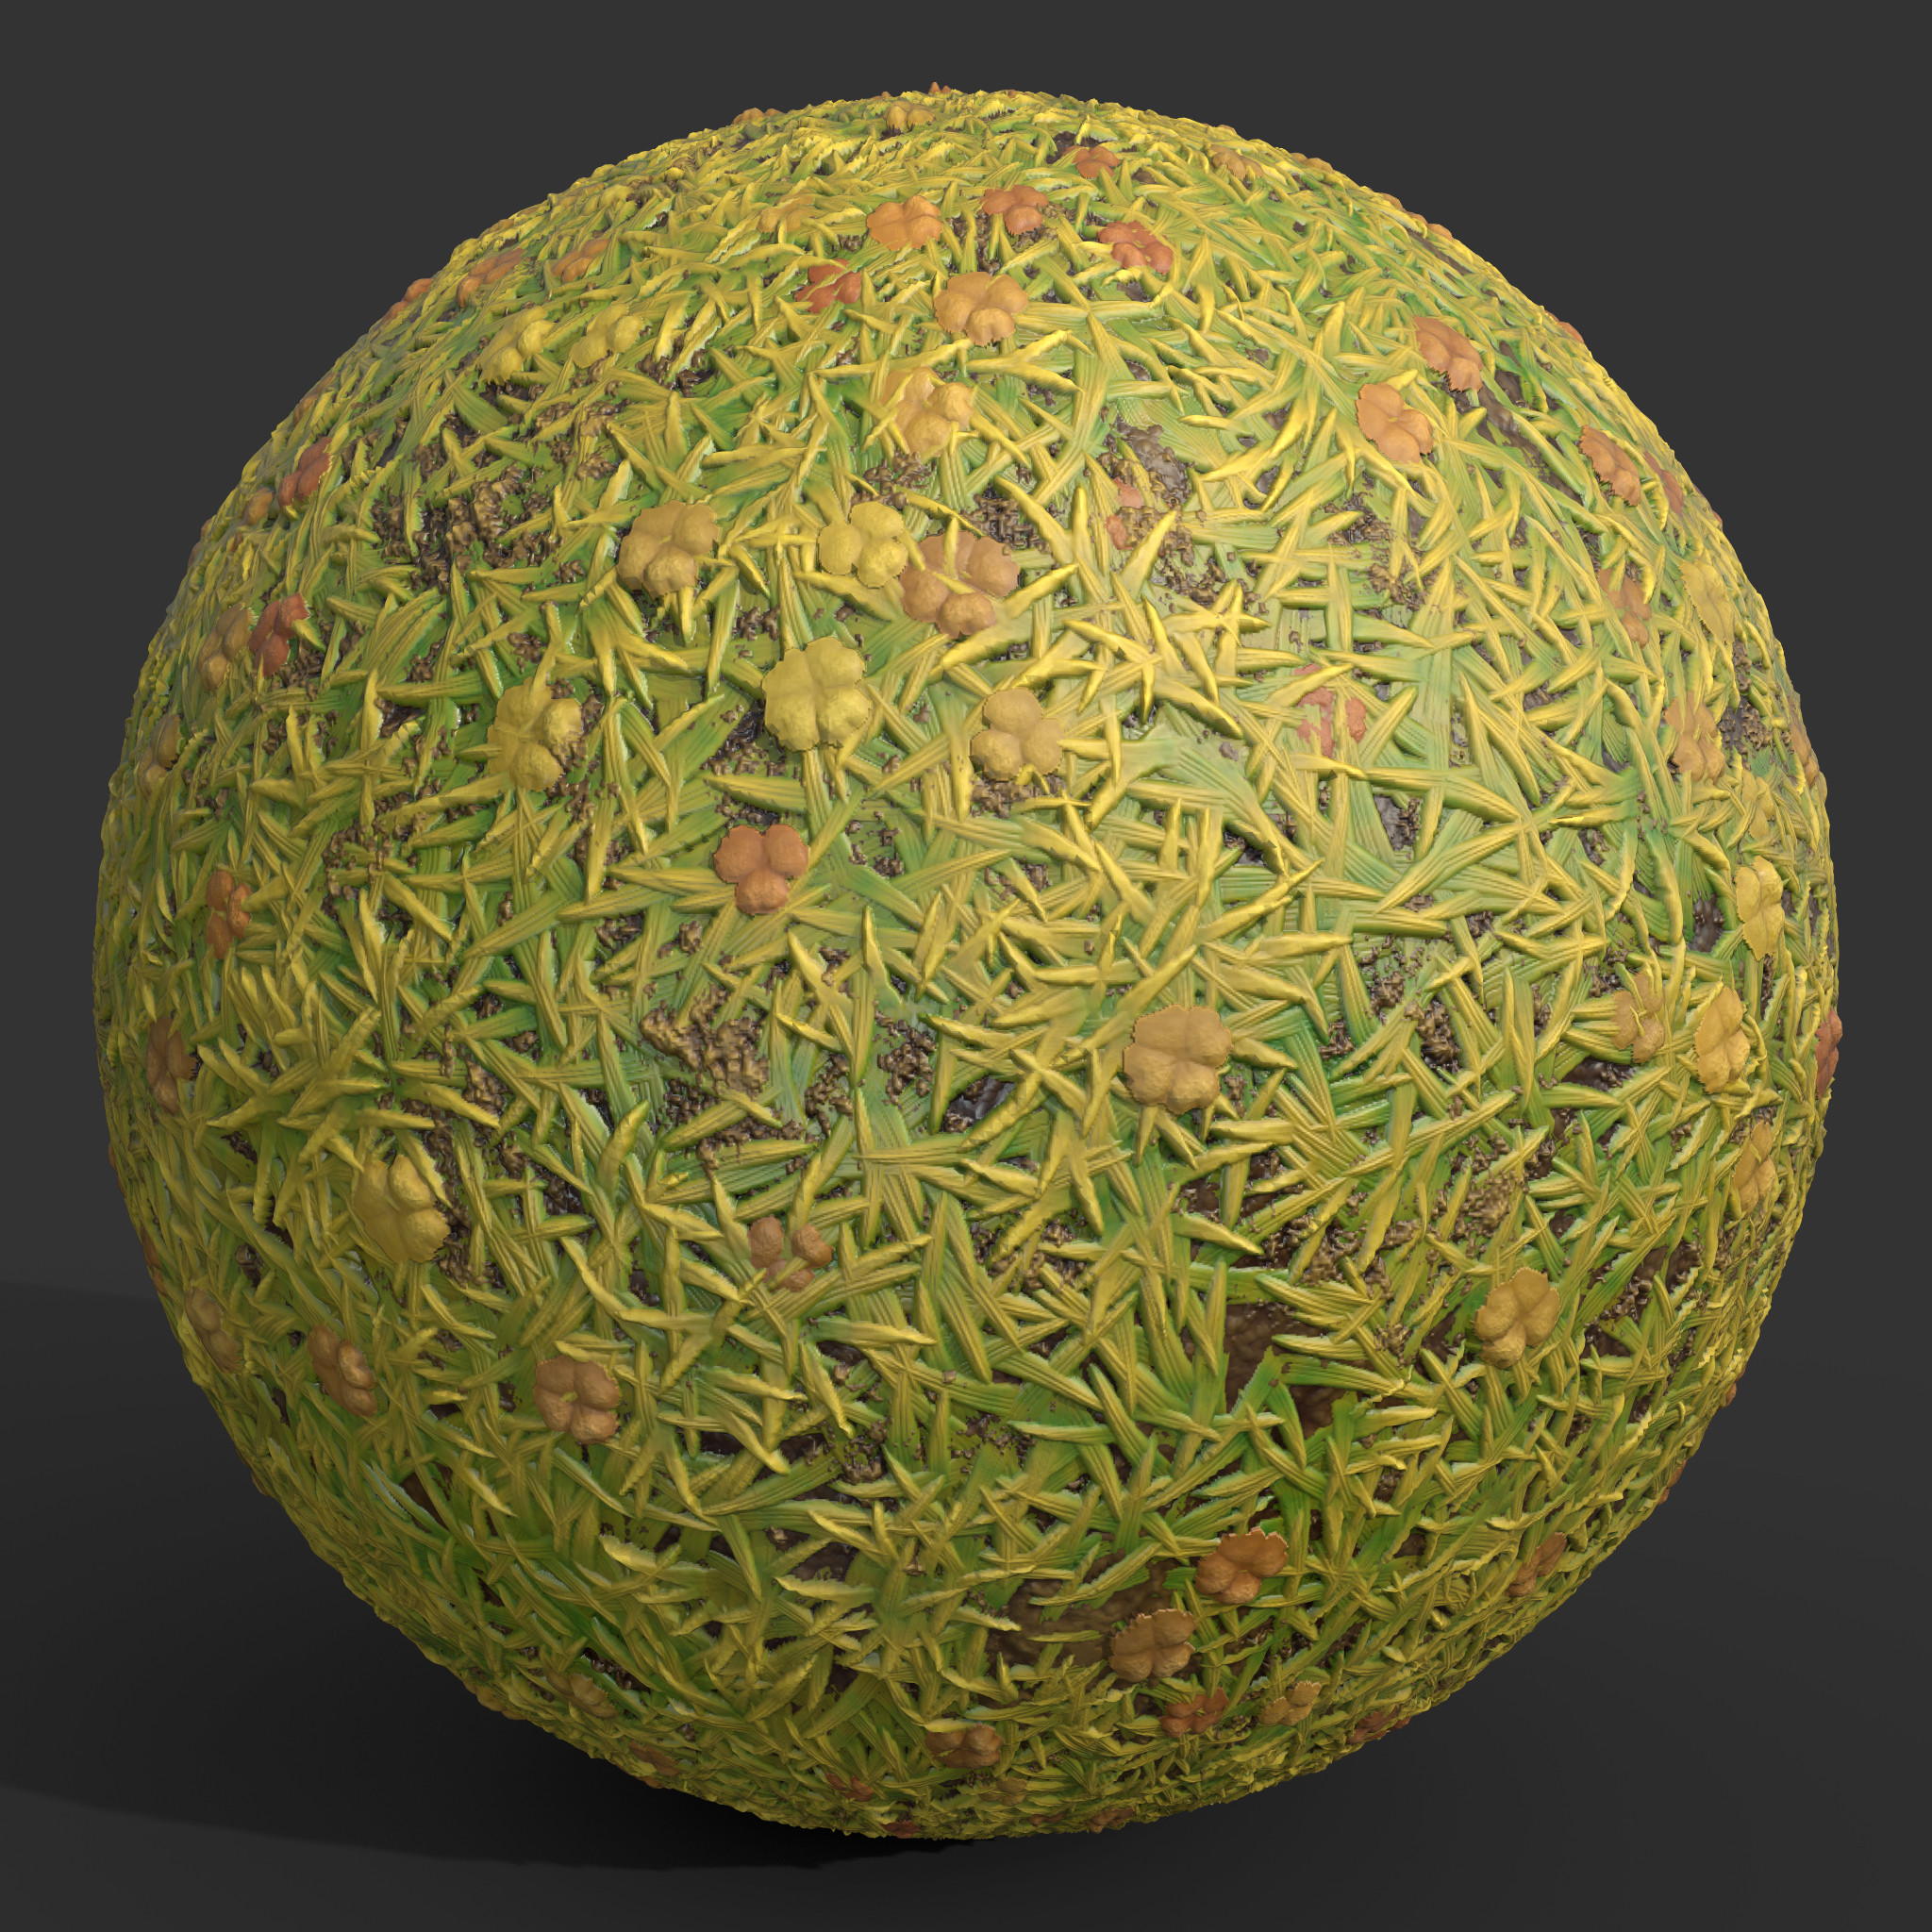 Created following a tutorial from Adobe on stylized grass. Modified to be less stylized and more inline with the other materials.